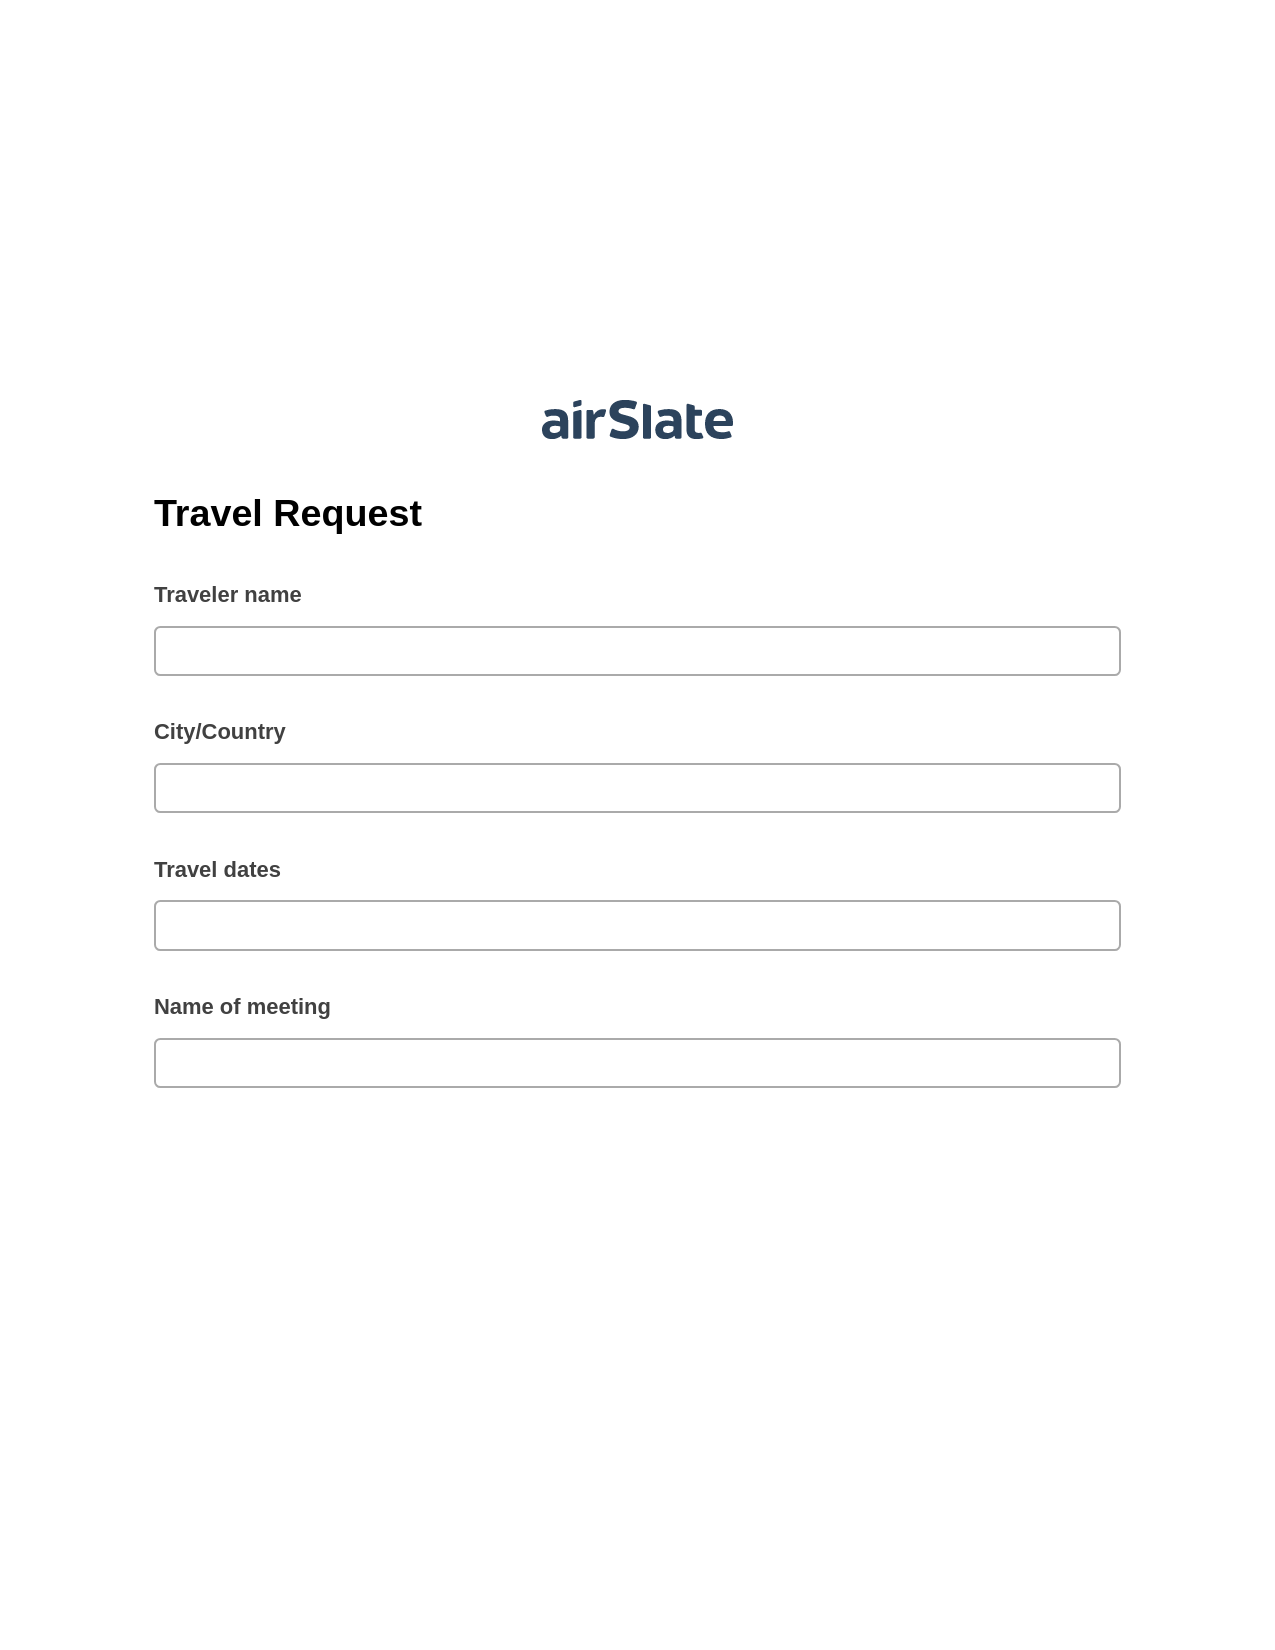 Travel Request Pre-fill Slate from MS Dynamics 365 Records Bot, Create MS Dynamics 365 Records Bot, Google Drive Bot